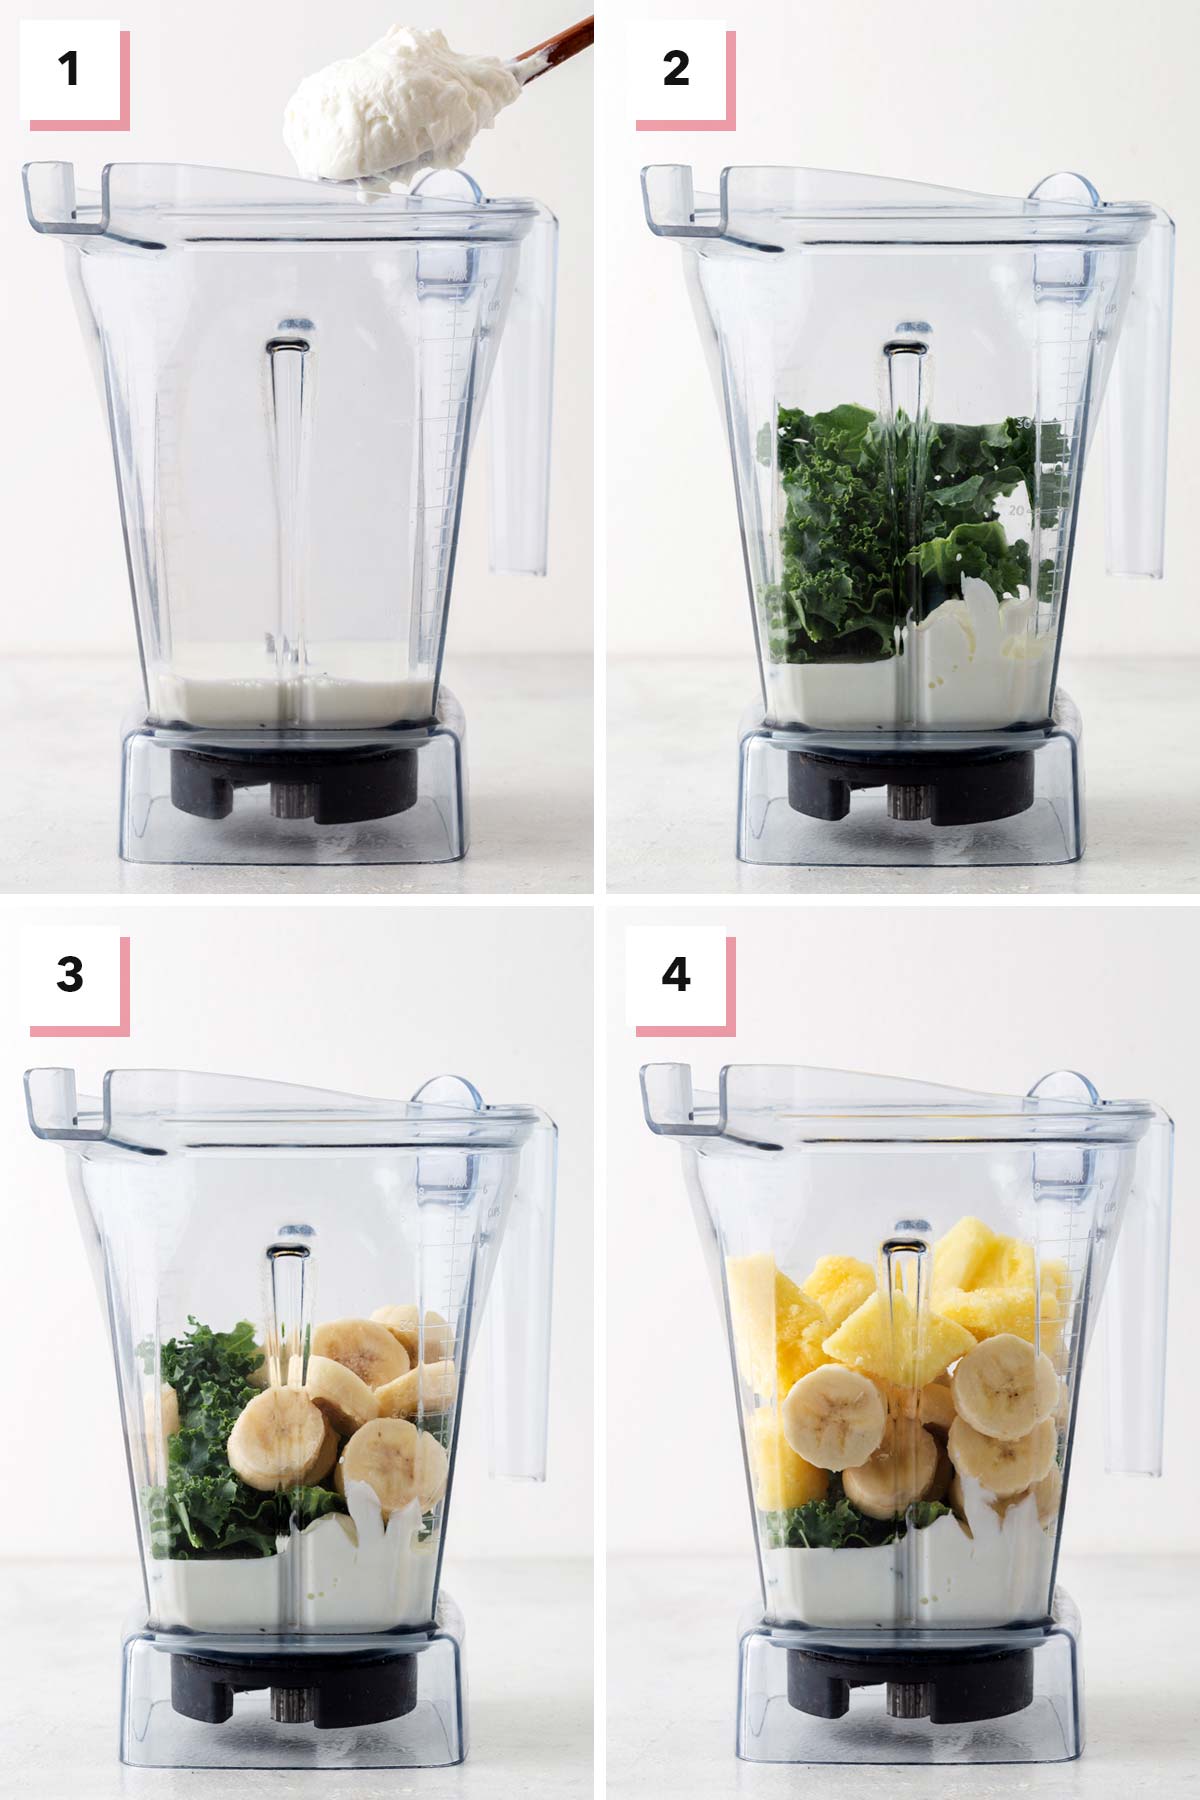 Steps to make a kale pineapple smoothie.